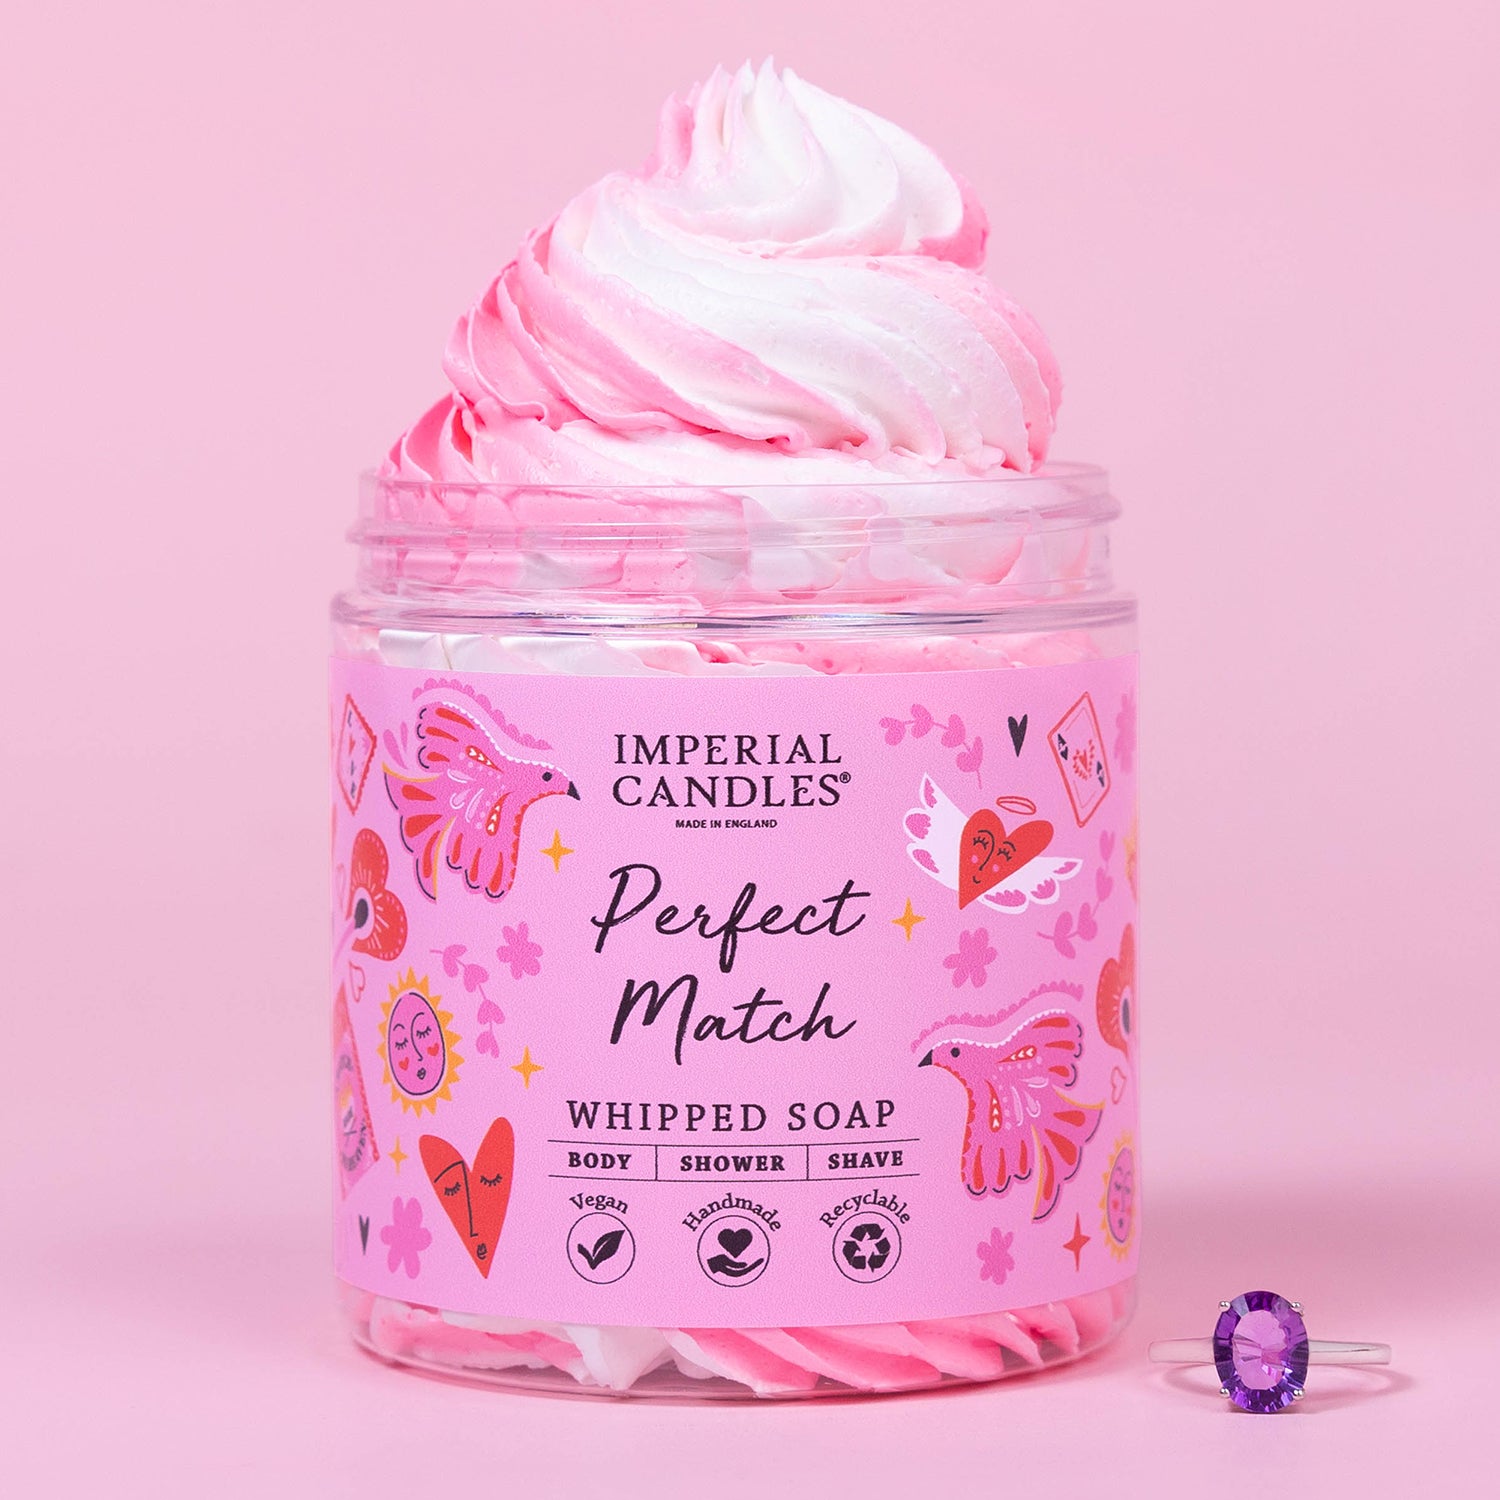 Perfect Match - Whipped Soap